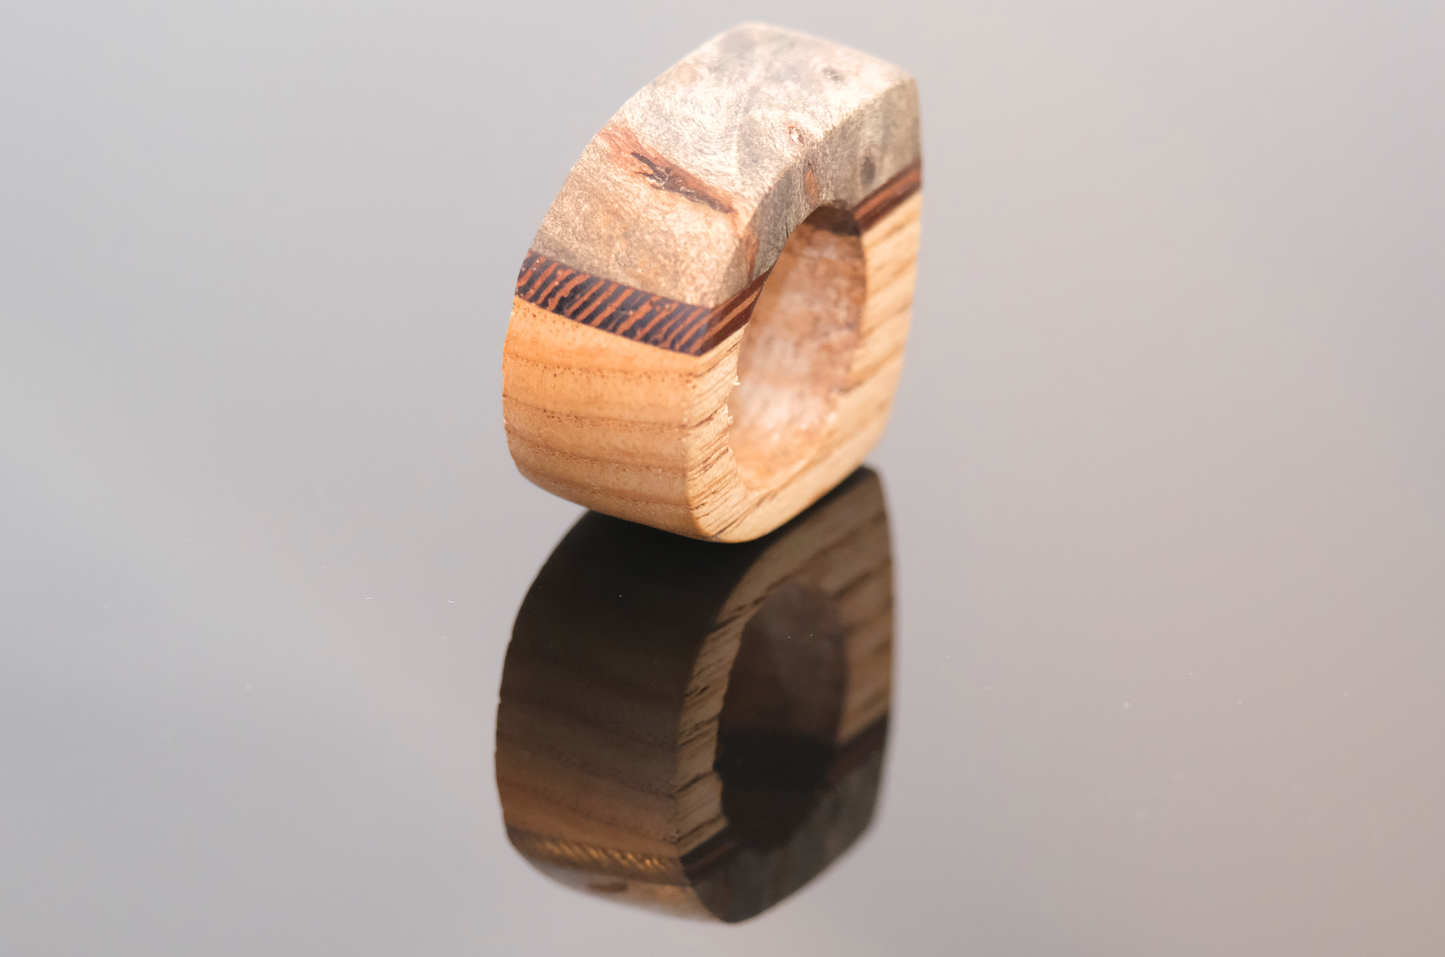 Stoned - Wenge and Maple Wood Ring - by Nicholas Howlett